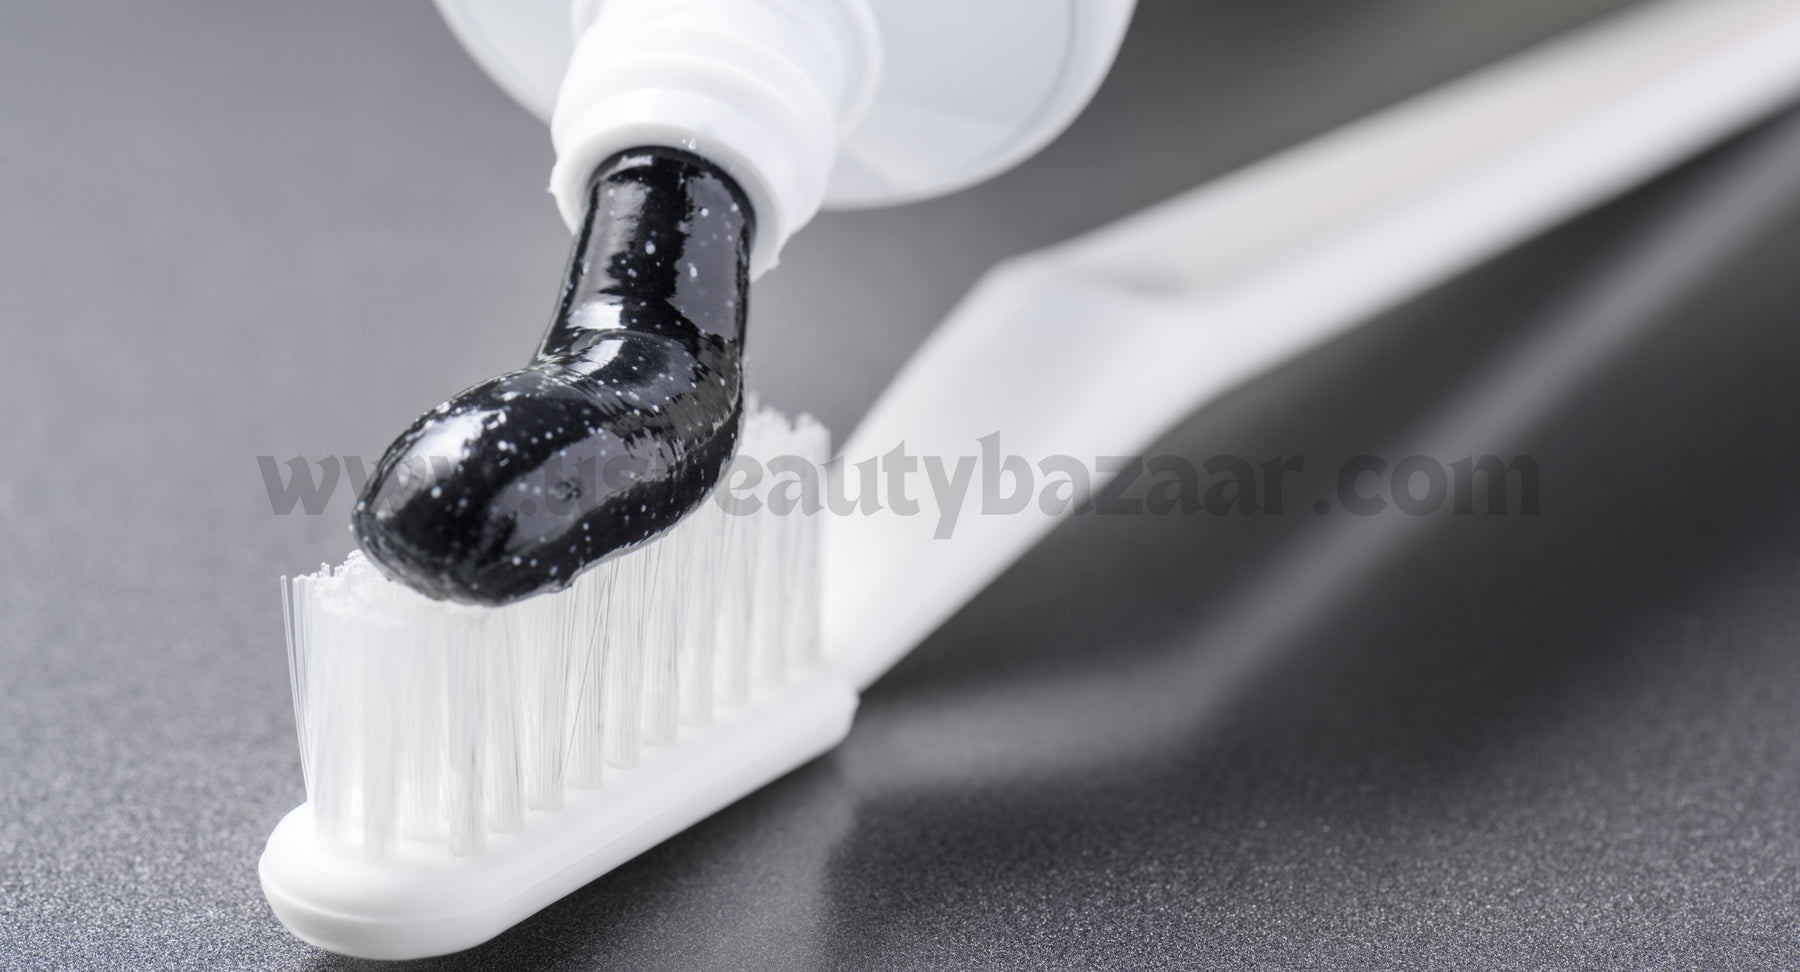 Can Toothpaste Repair Enamel? A Closer Look at the Claims